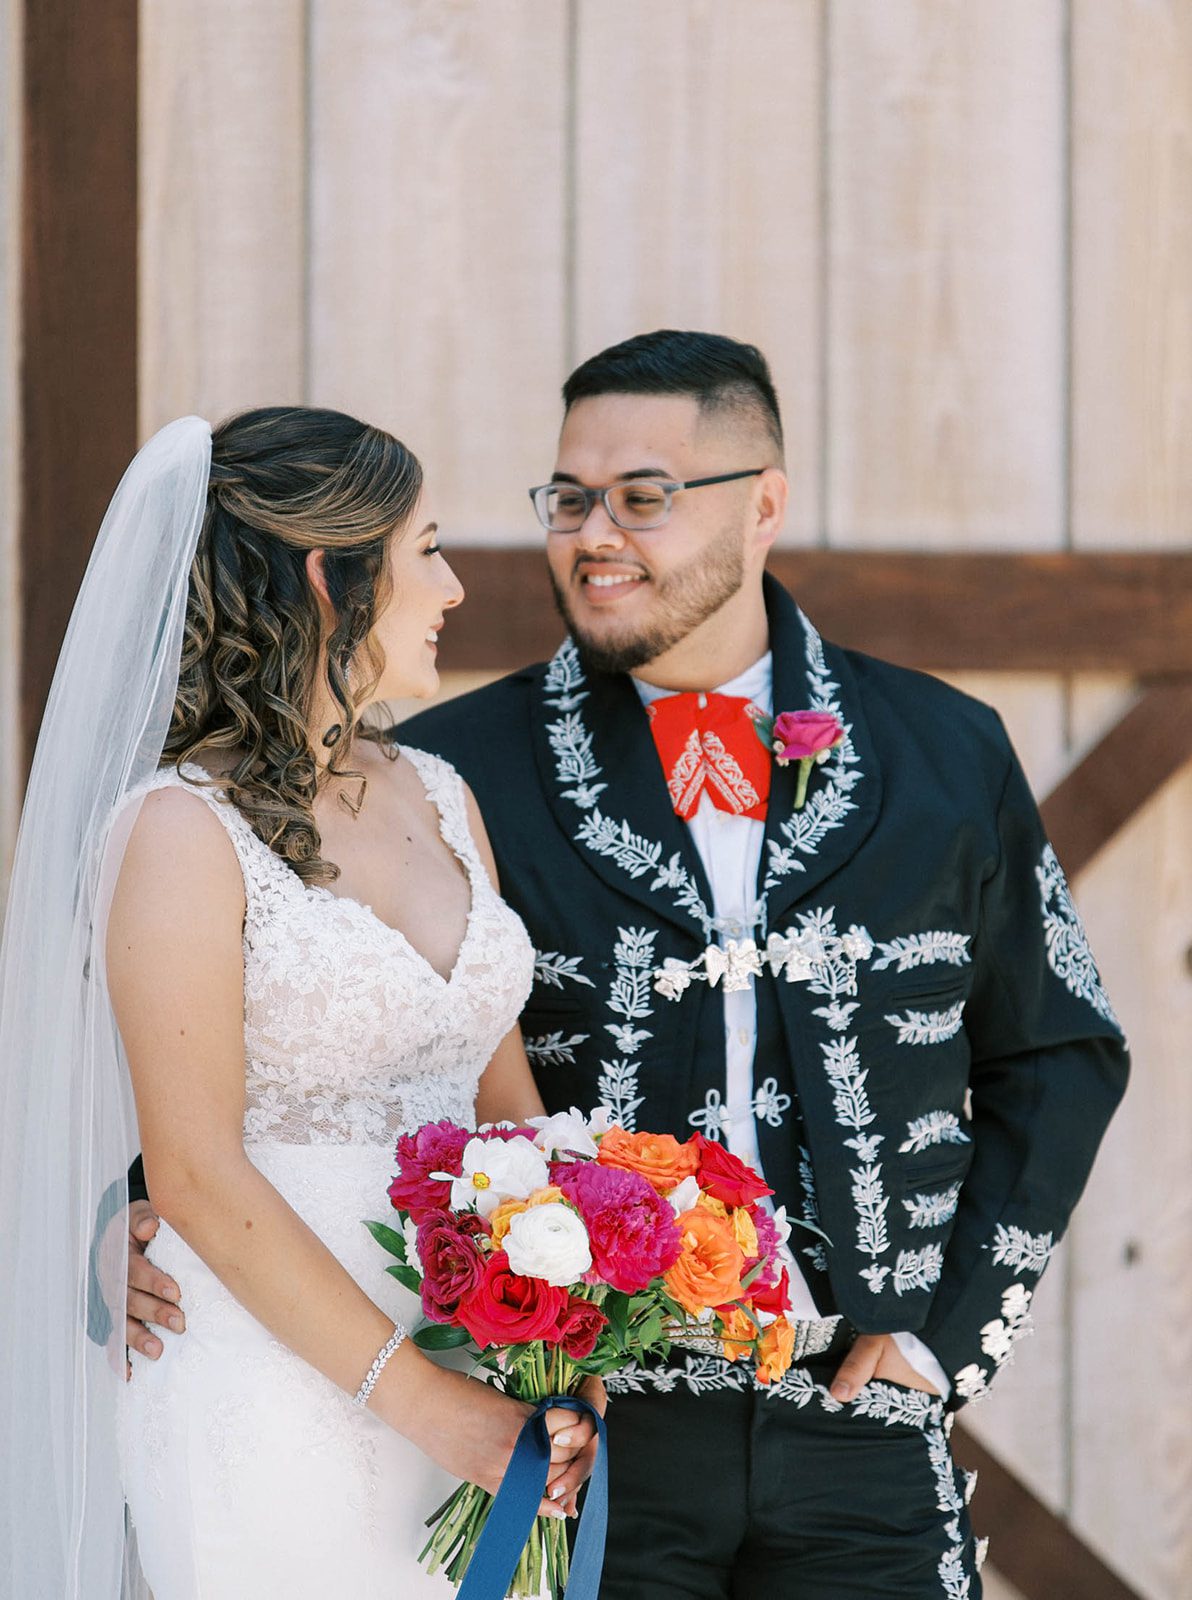 Mexican bride and groom smiling at one another as they stand outside of a barn together.